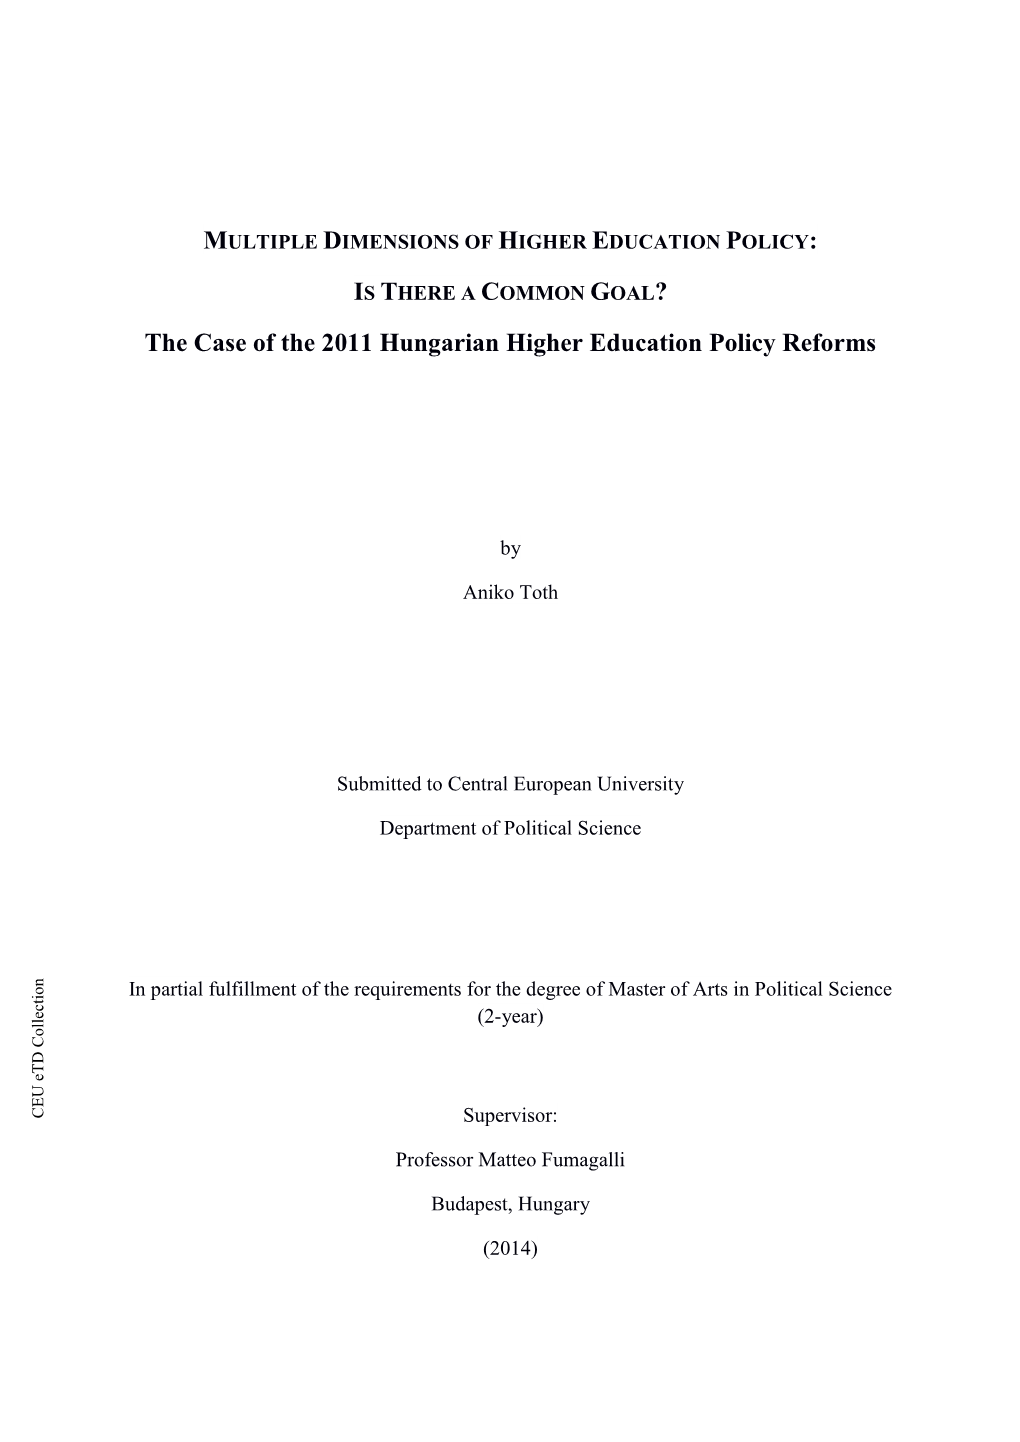 The Case of the 2011 Hungarian Higher Education Policy Reforms